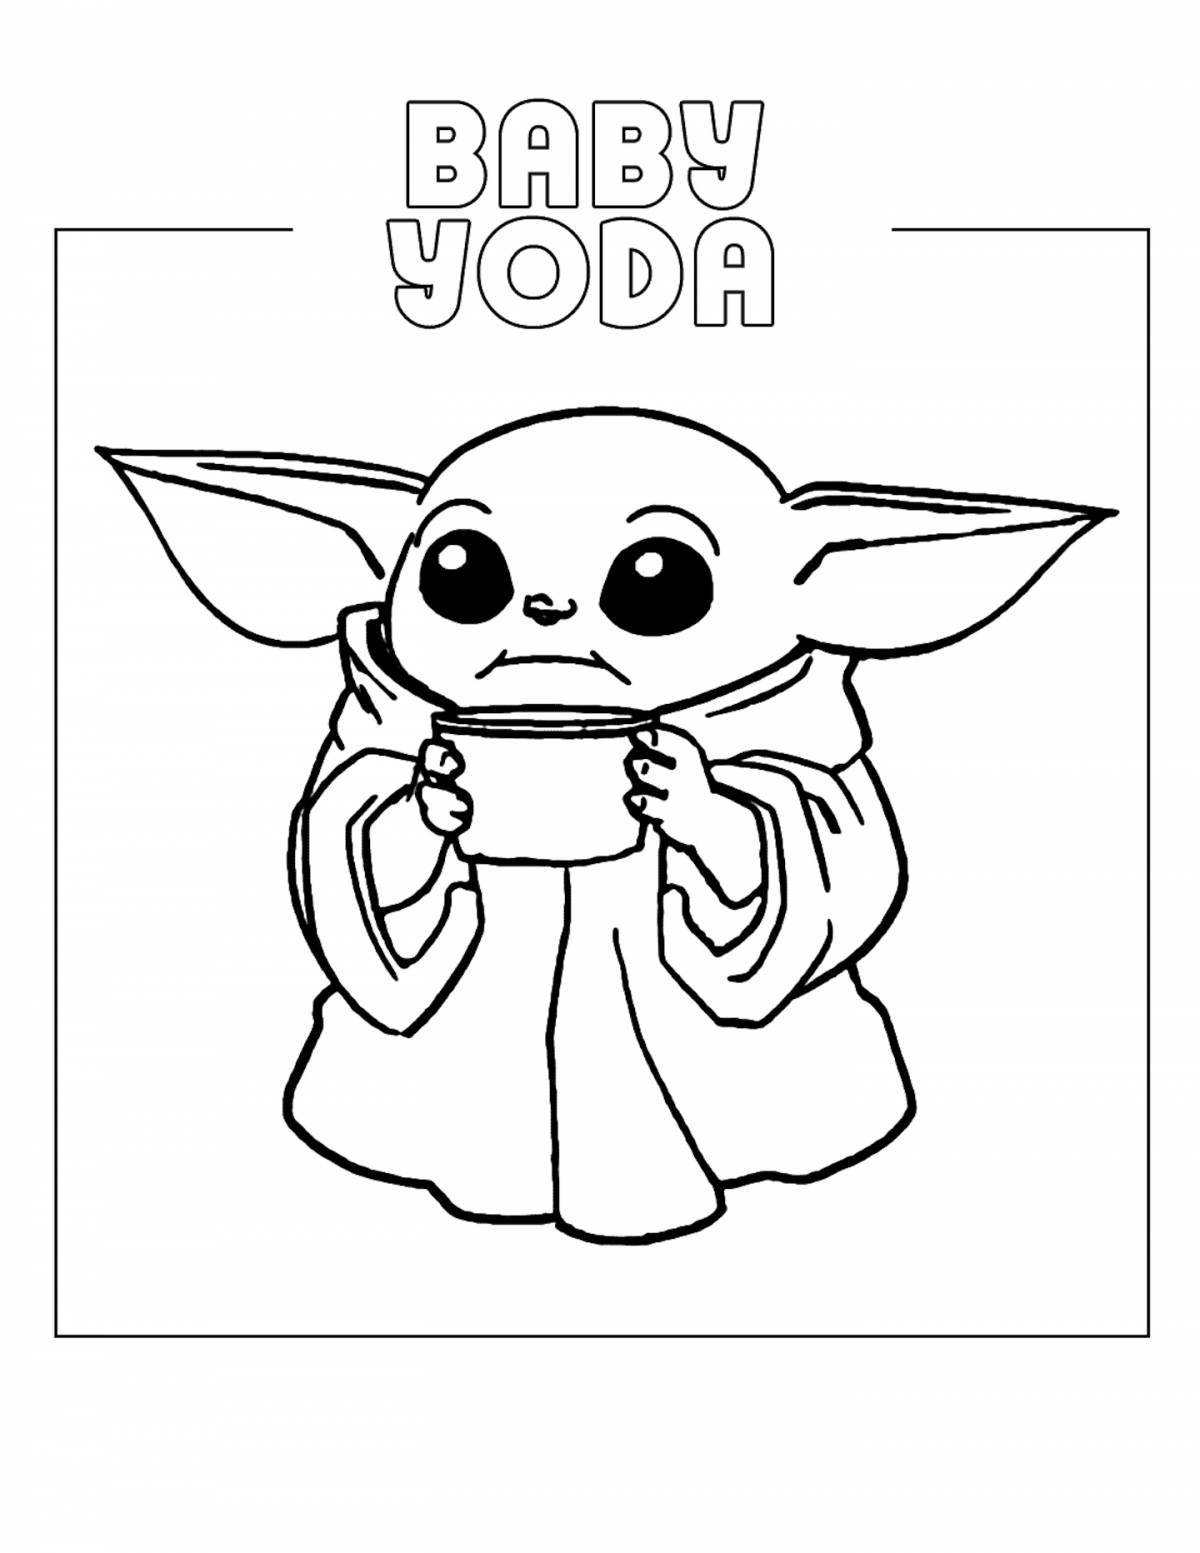 Yoda live coloring for juniors